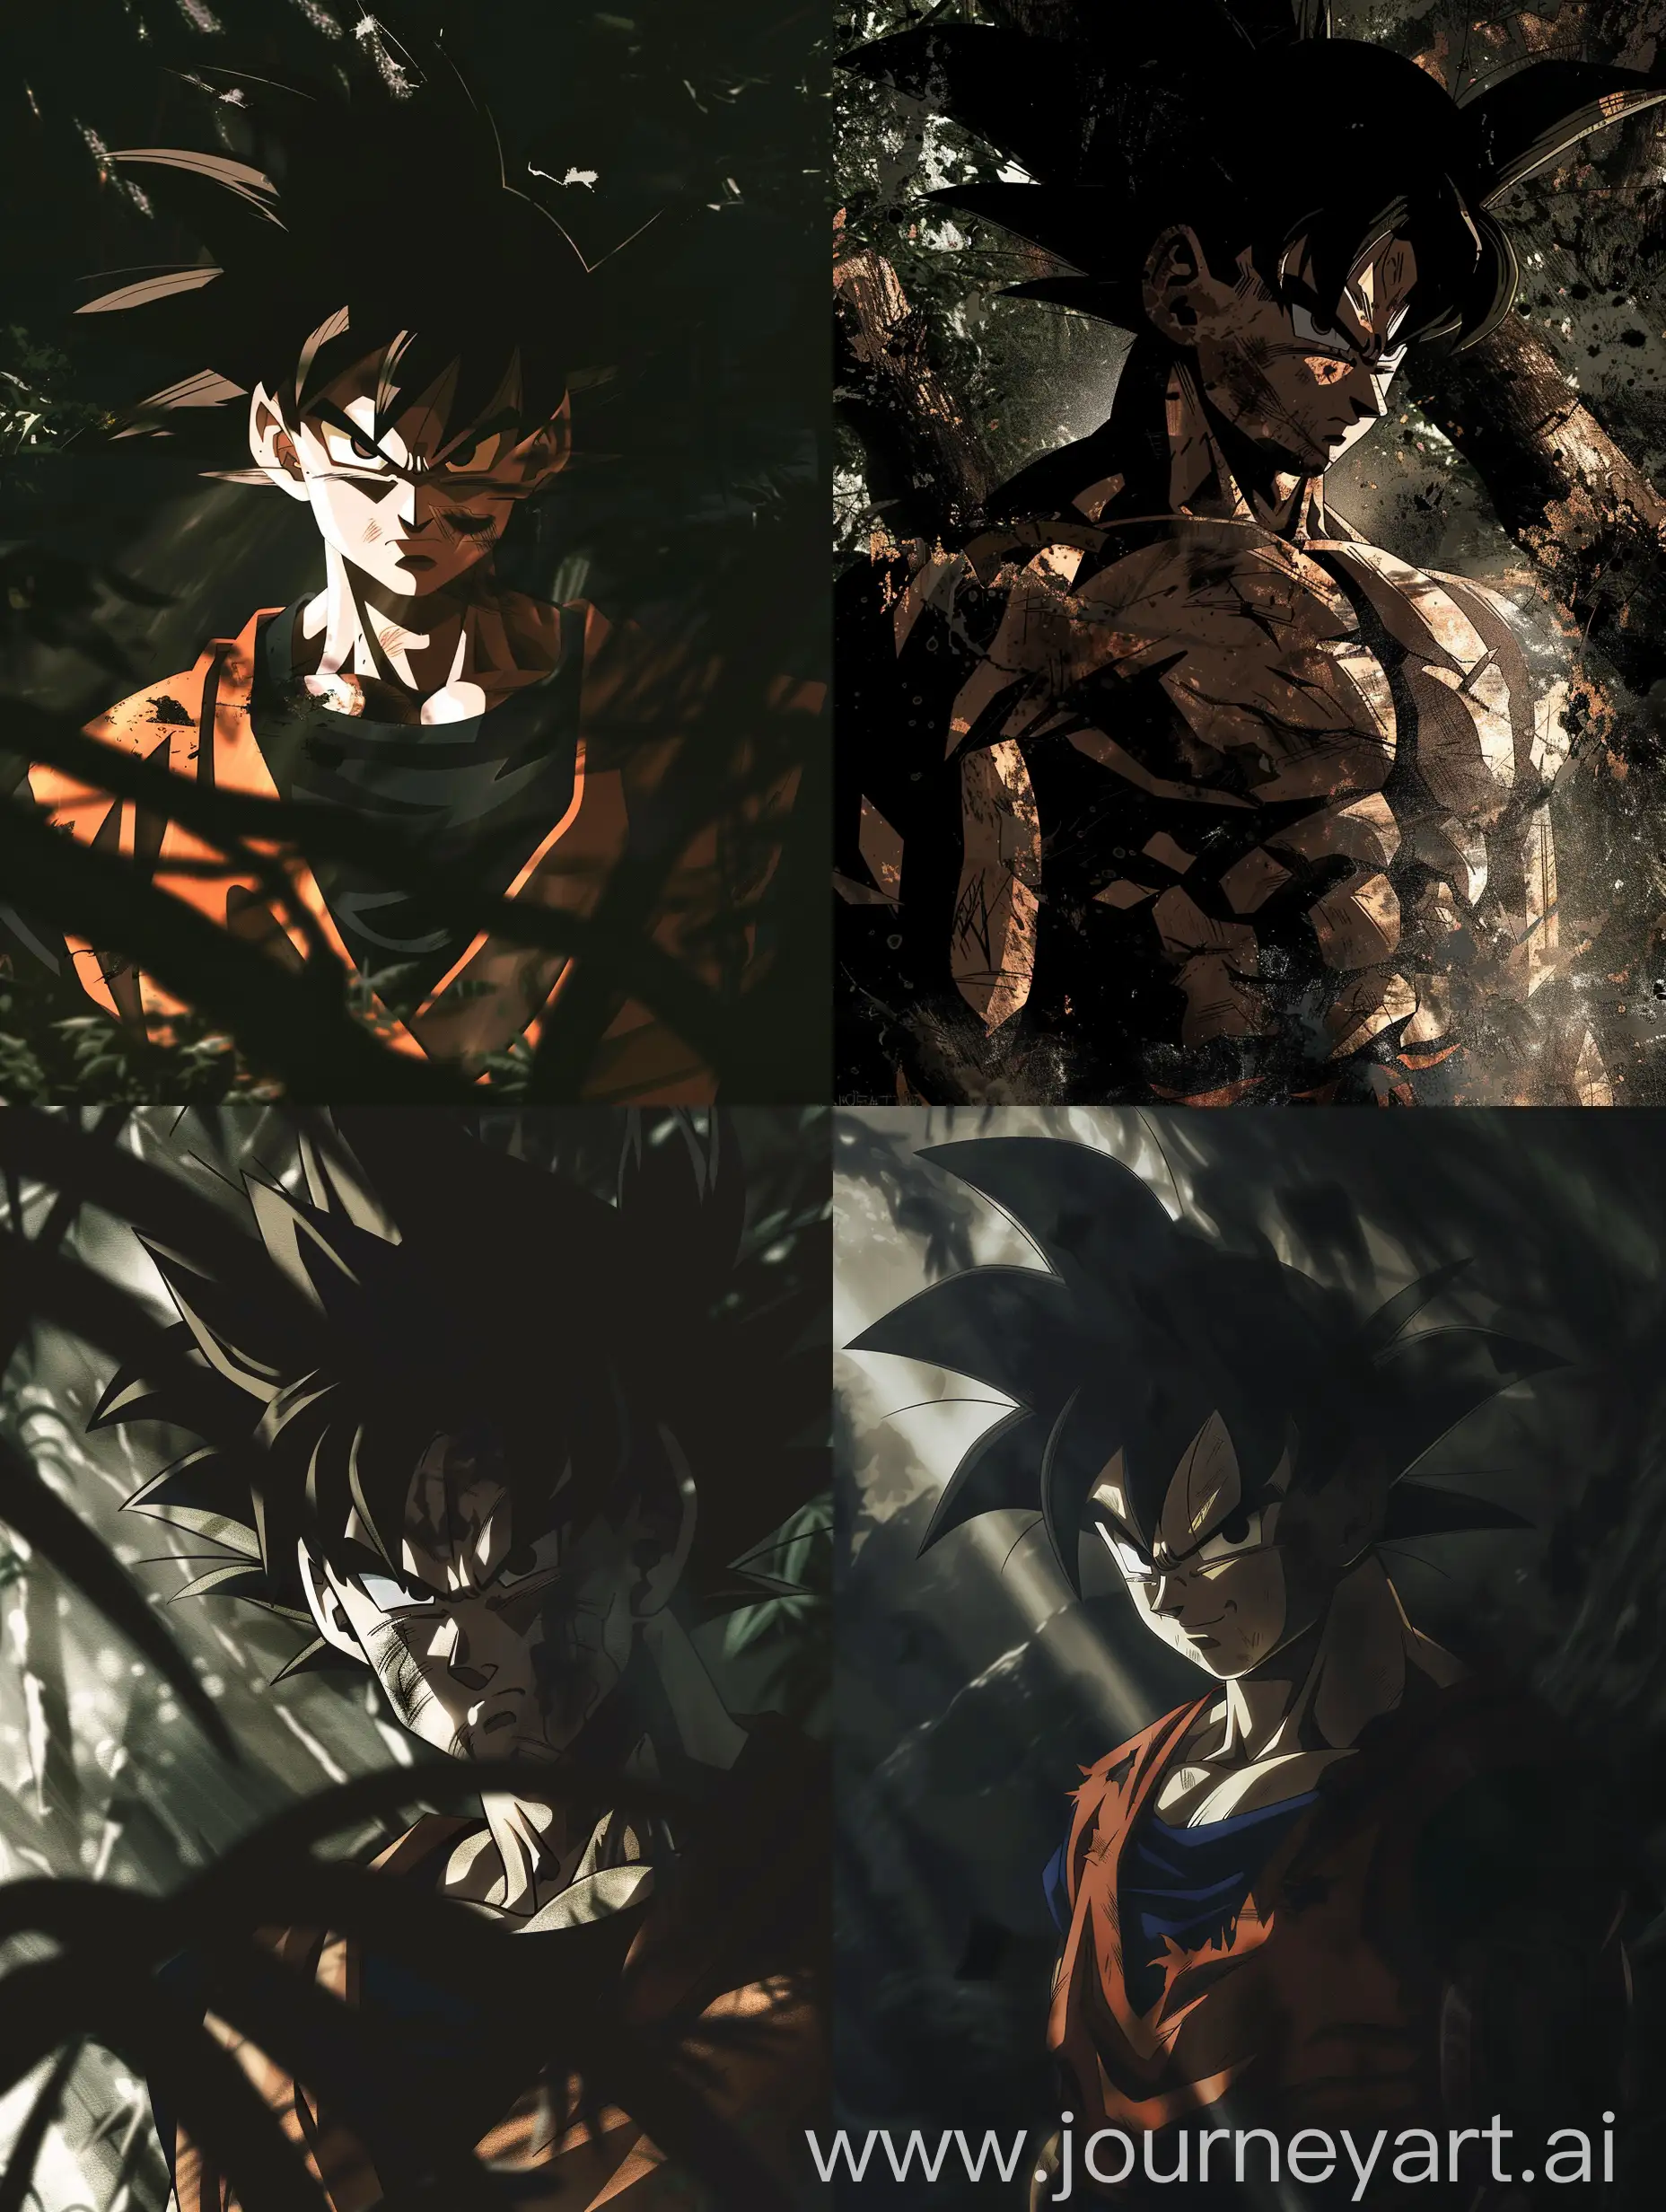 Depict Goku shrouded in shadows, with light highlighting only parts of his face and body. He could be in a battle stance, with a serious and determined expression, while the environment around him is obscured, conveying an atmosphere of suspense and tension.